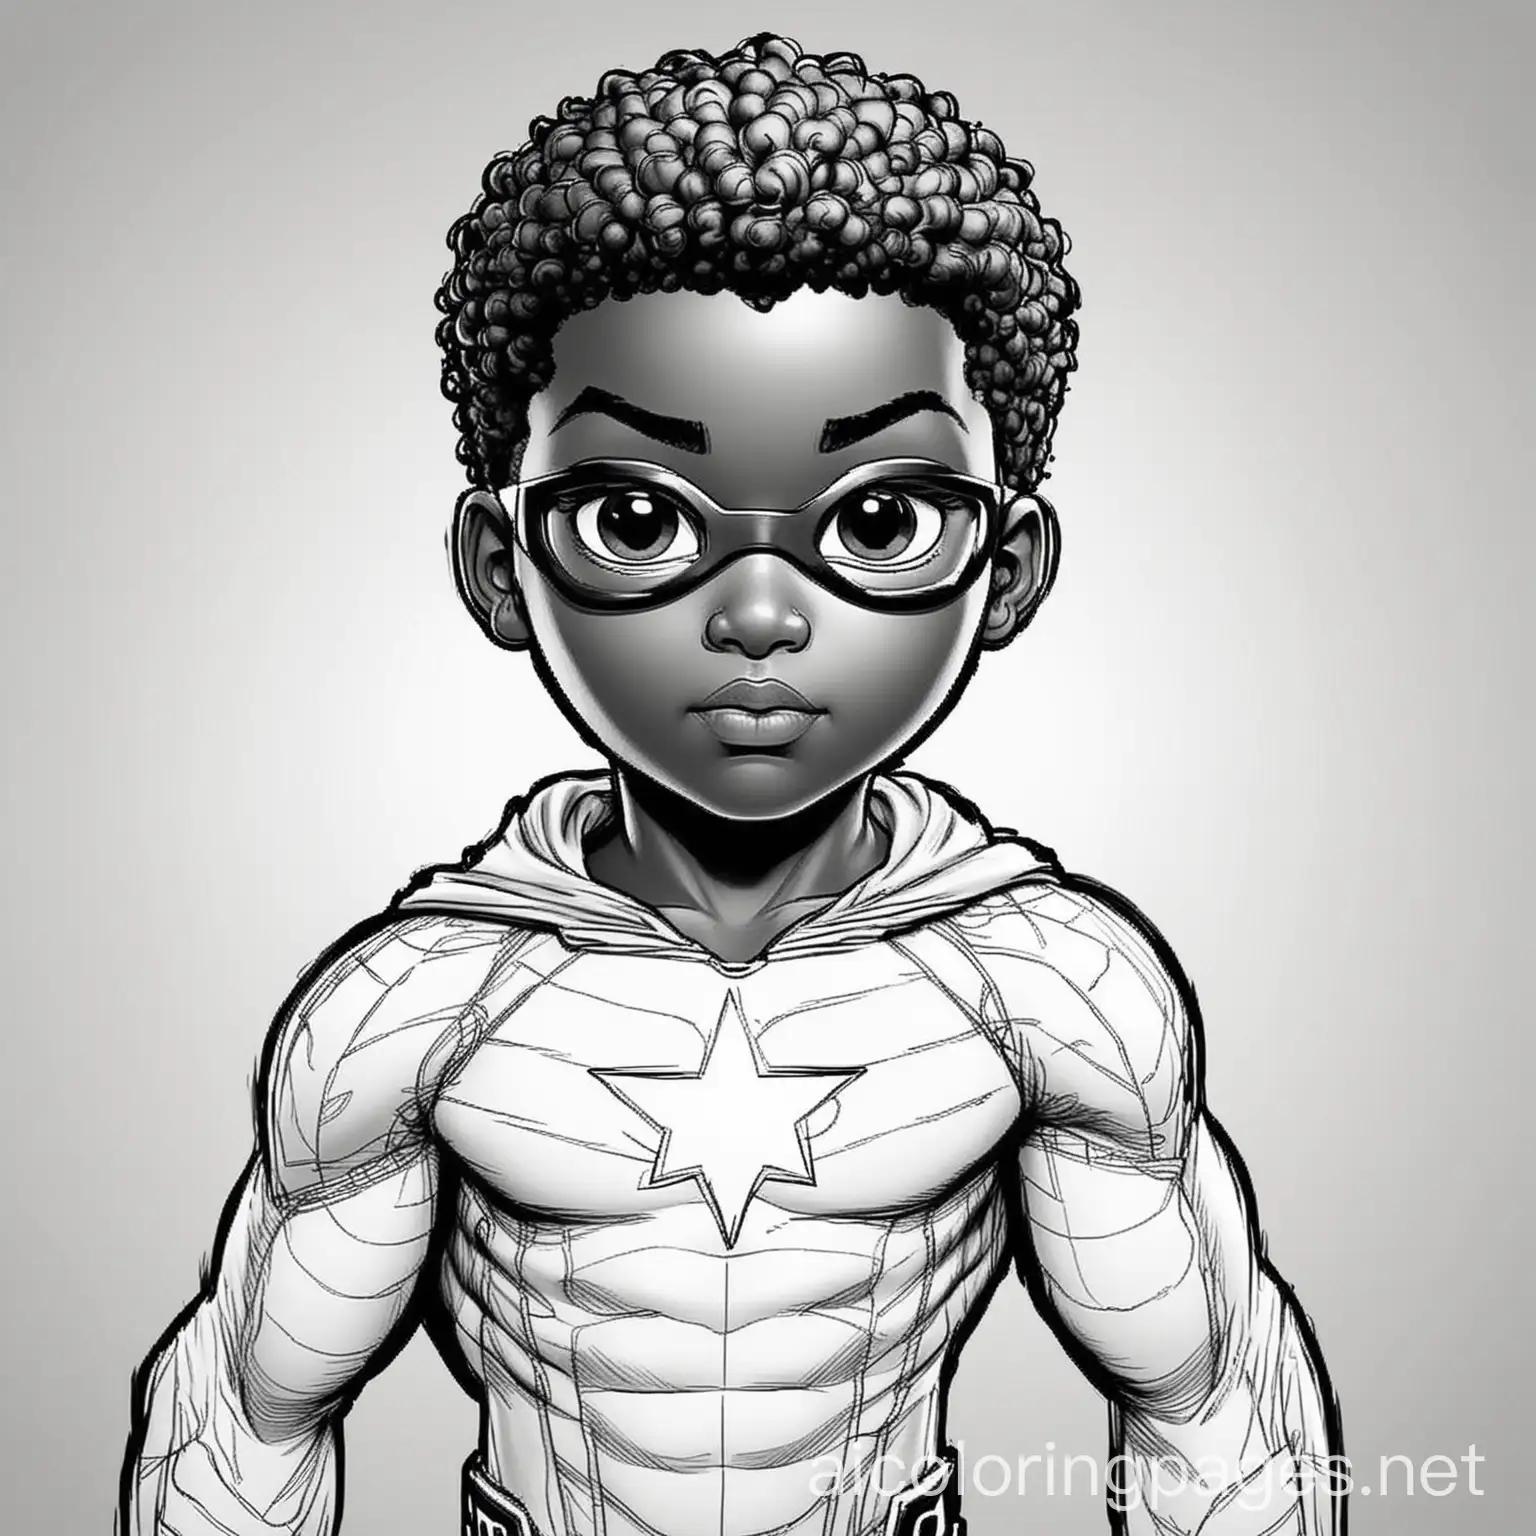 Black-Superhero-Coloring-Page-with-Ample-White-Space